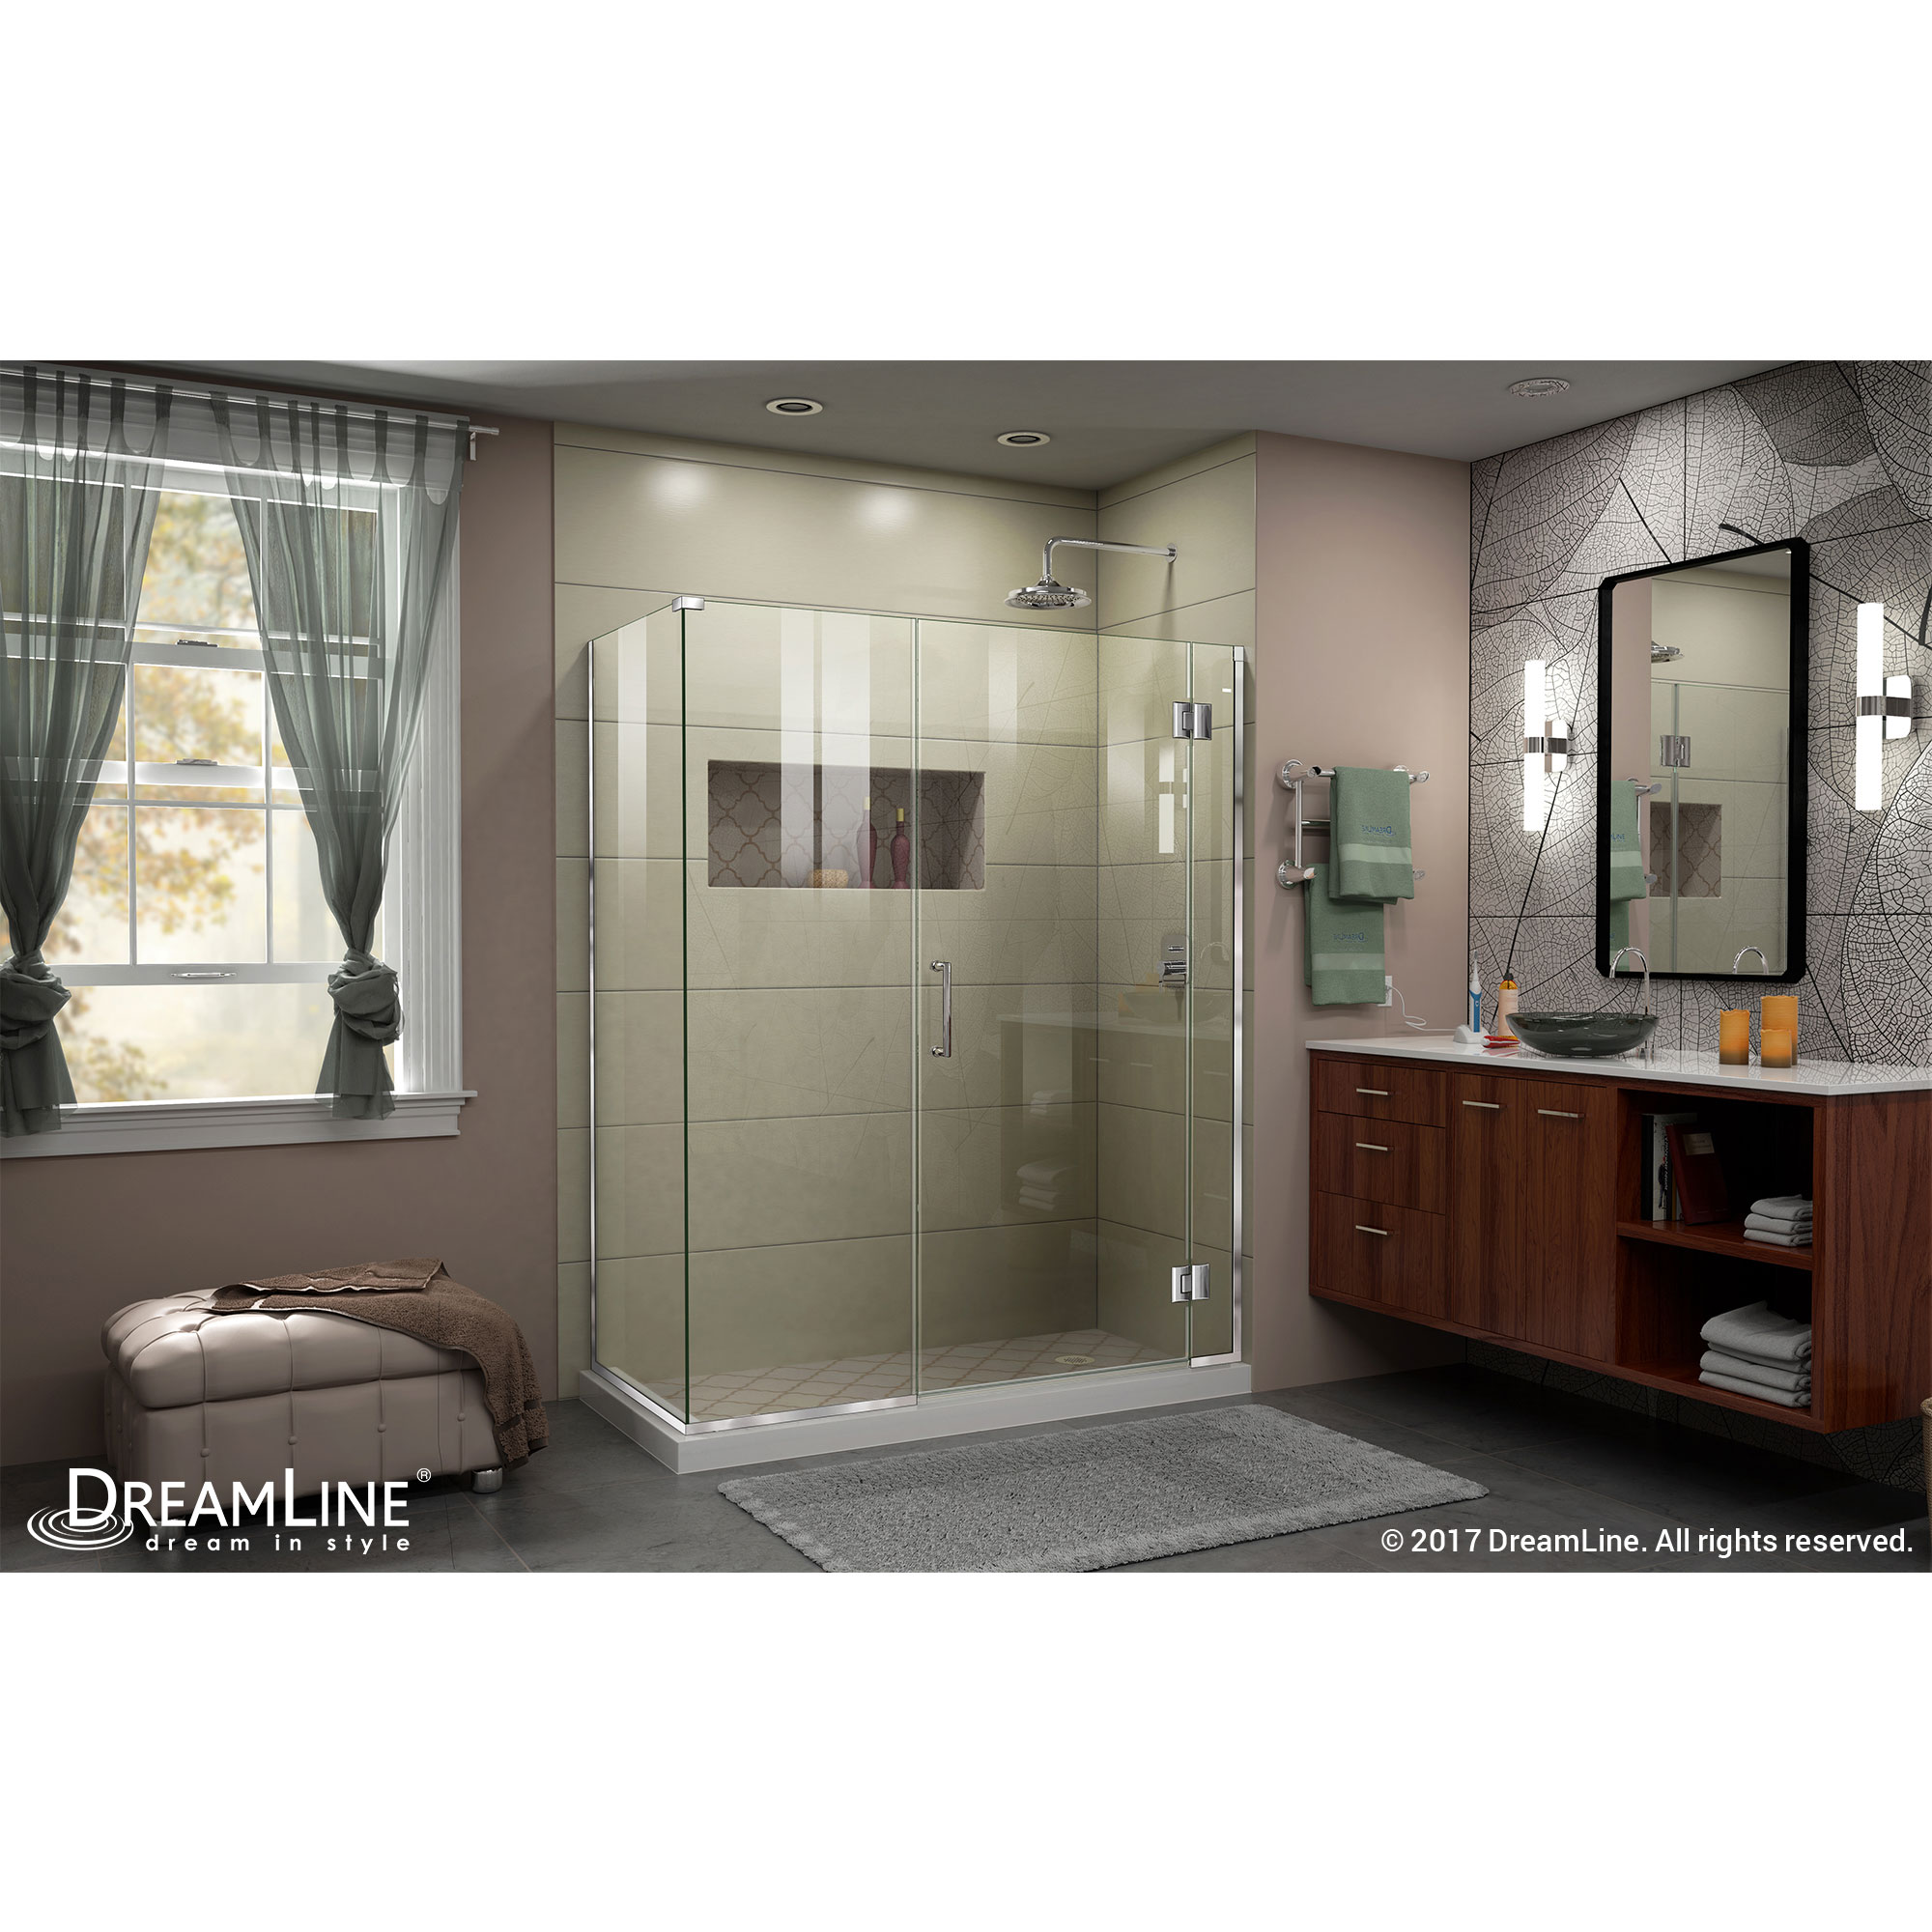 DreamLine Unidoor-X 45 in. W x 34 3/8 in. D x 72 in. H Frameless Hinged Shower Enclosure in Chrome